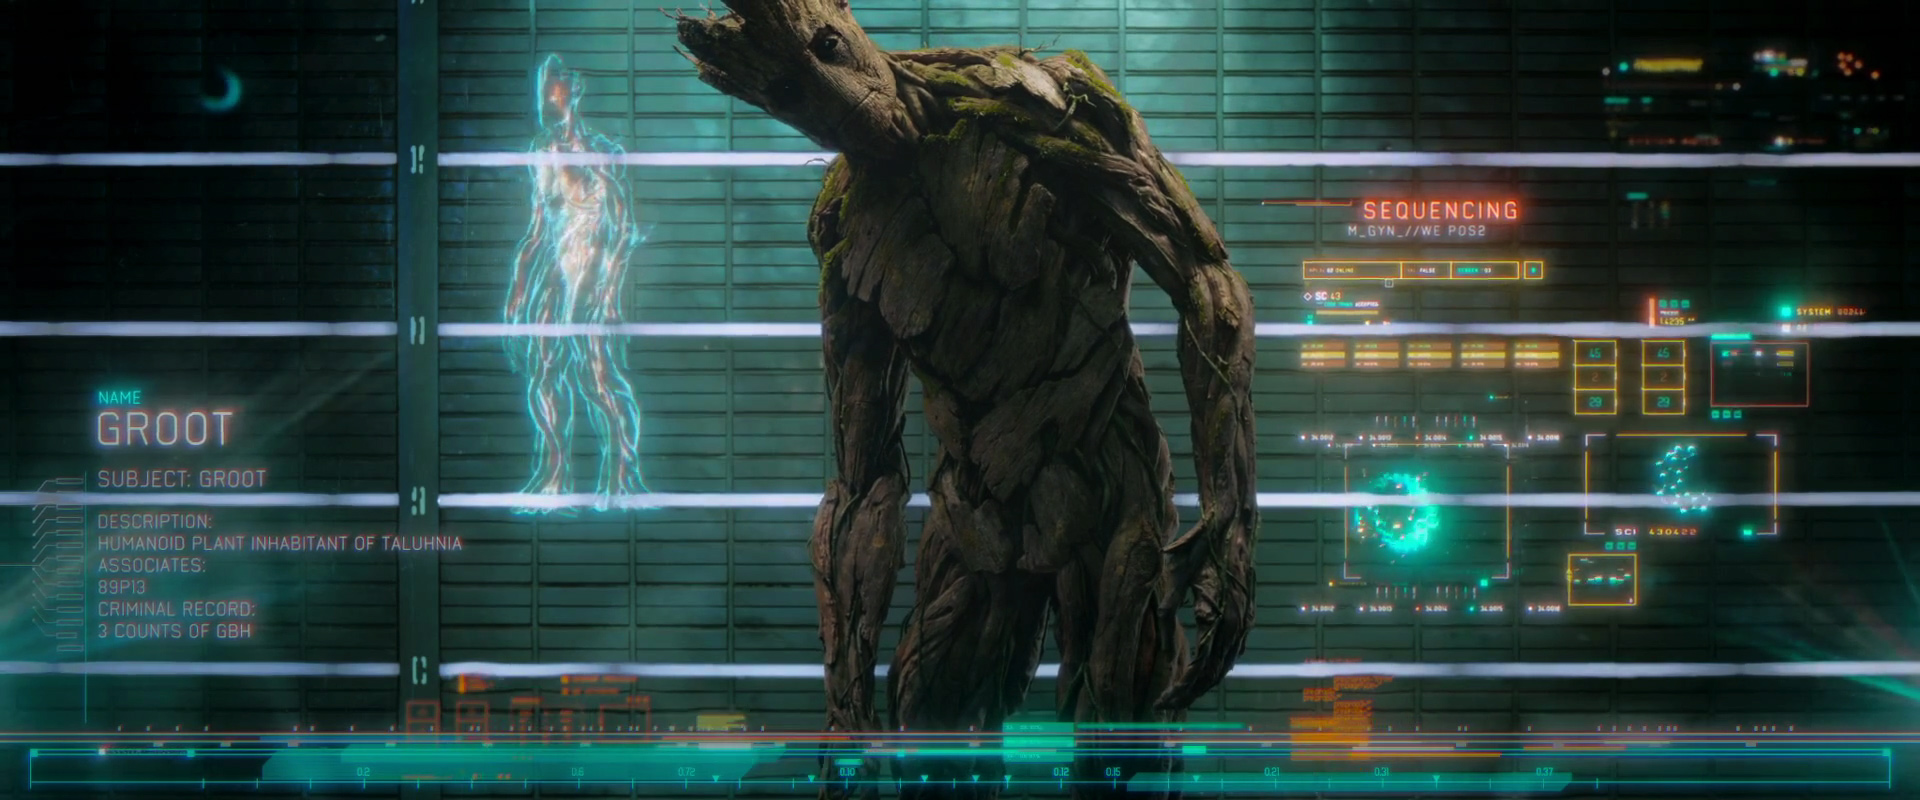 fantastic-trailer-for-guardians-of-the-galaxy-01.jpg